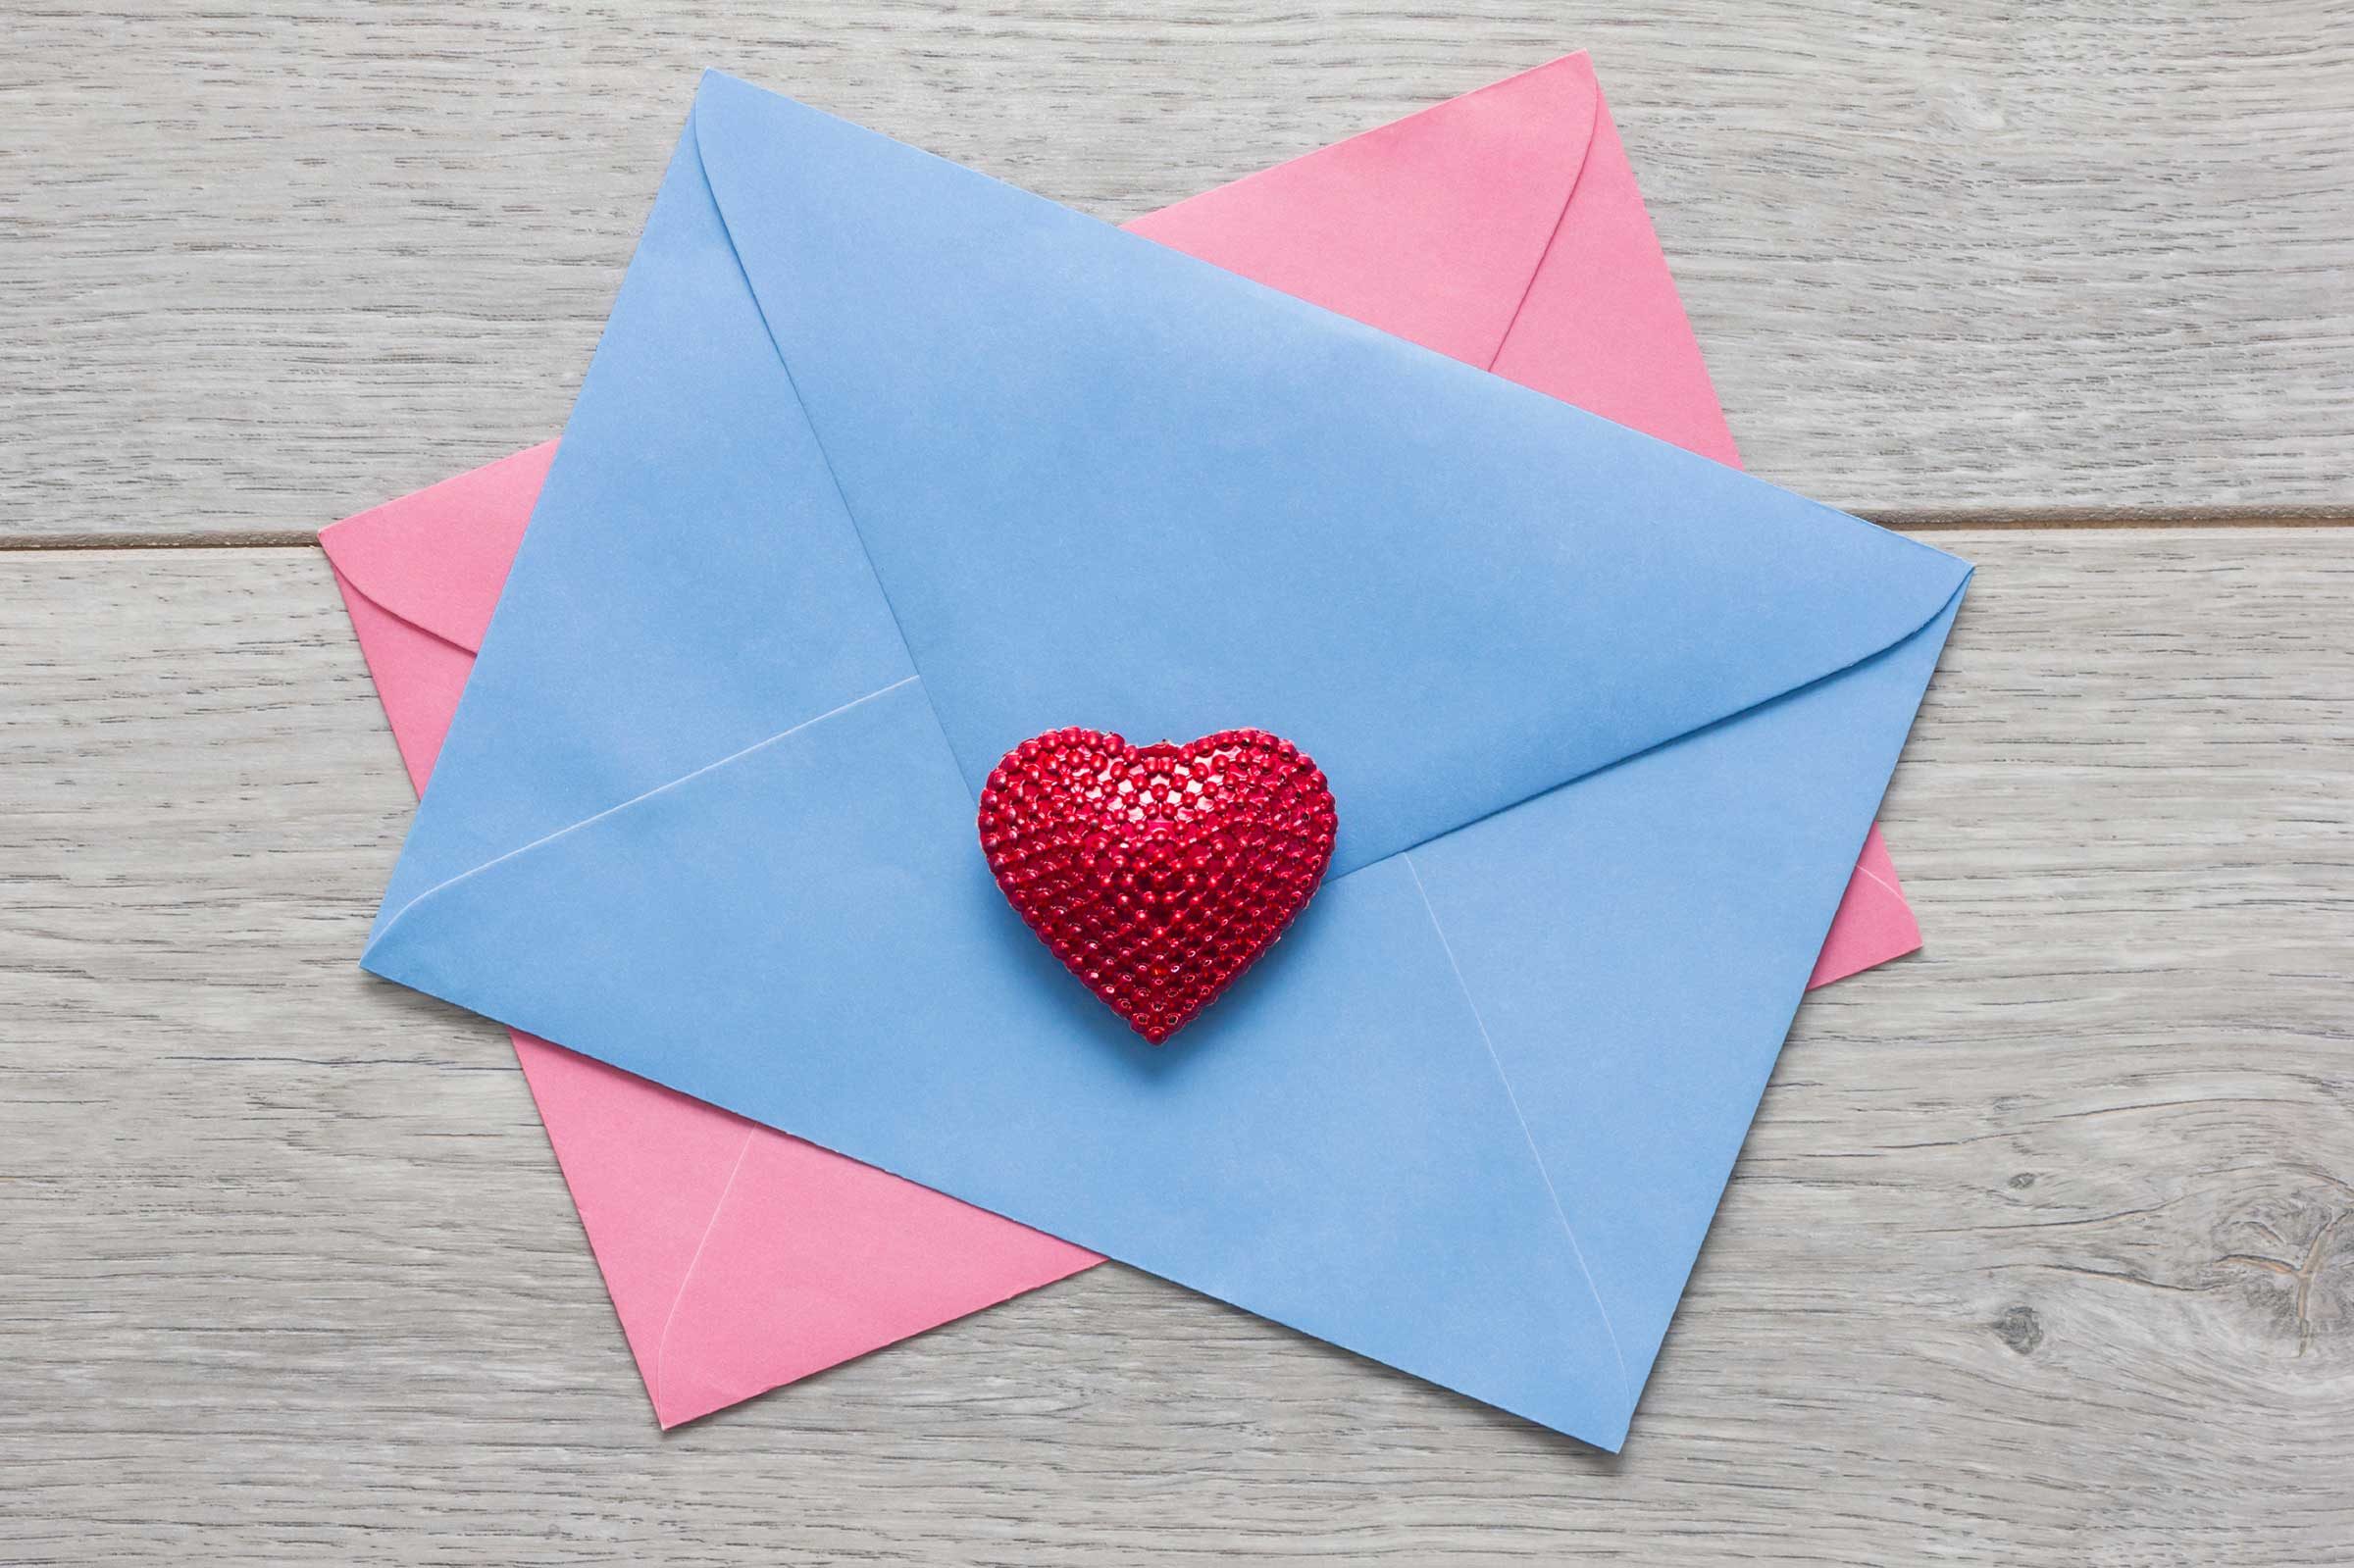 13 Things Your Card Store Won't Tell You on Valentine's Day | Reader's Digest2400 x 1599